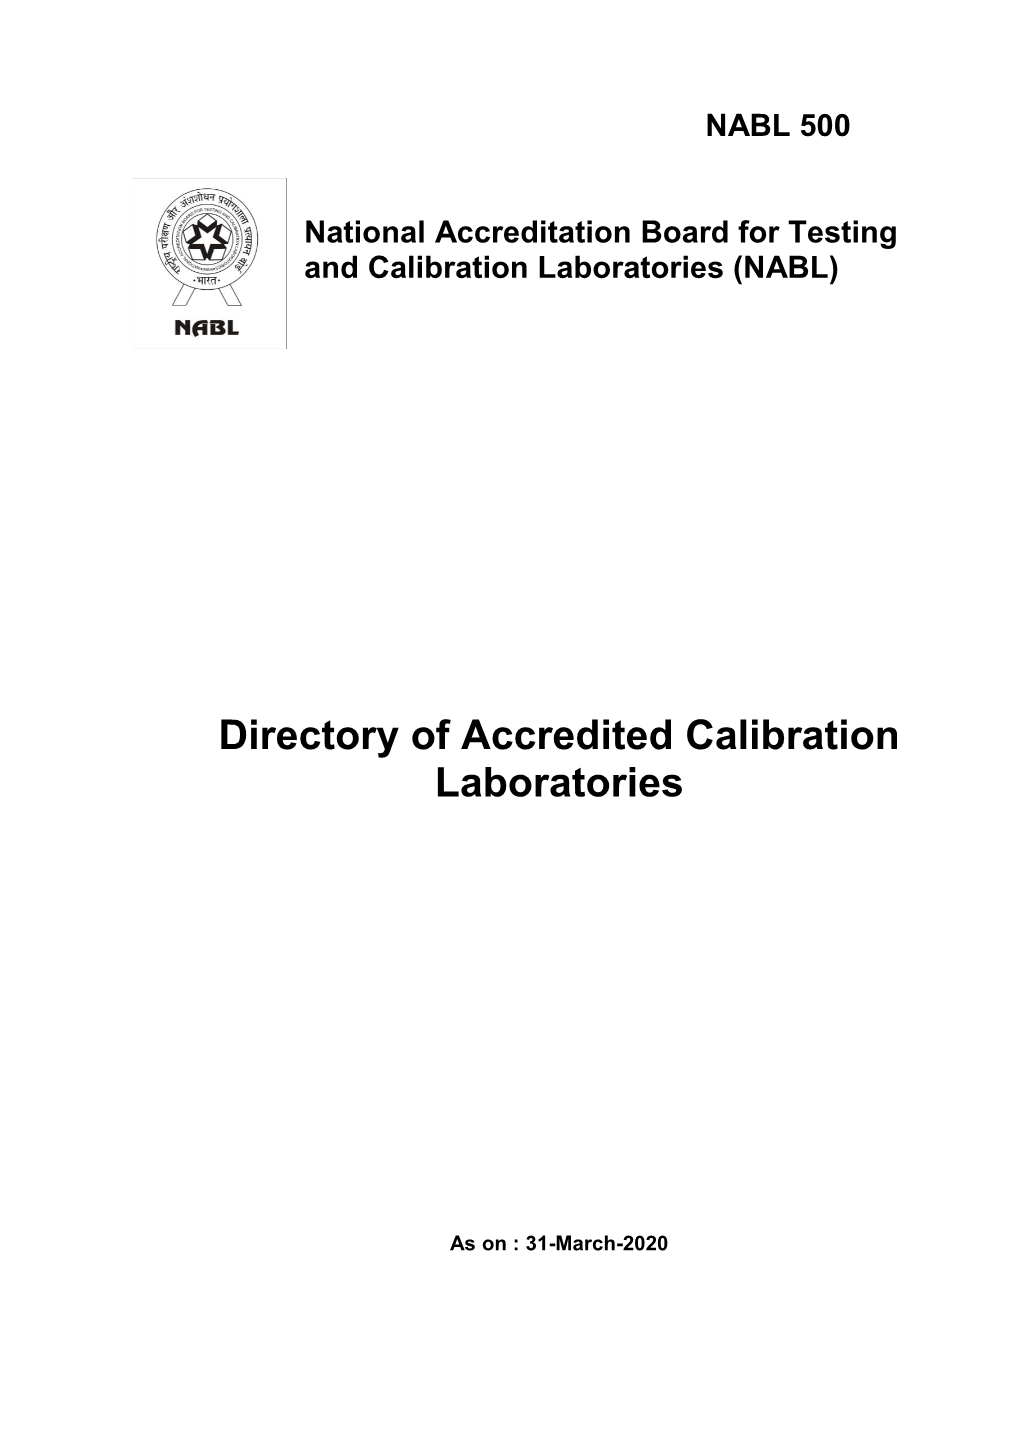 Directory of Accredited Calibration Laboratories